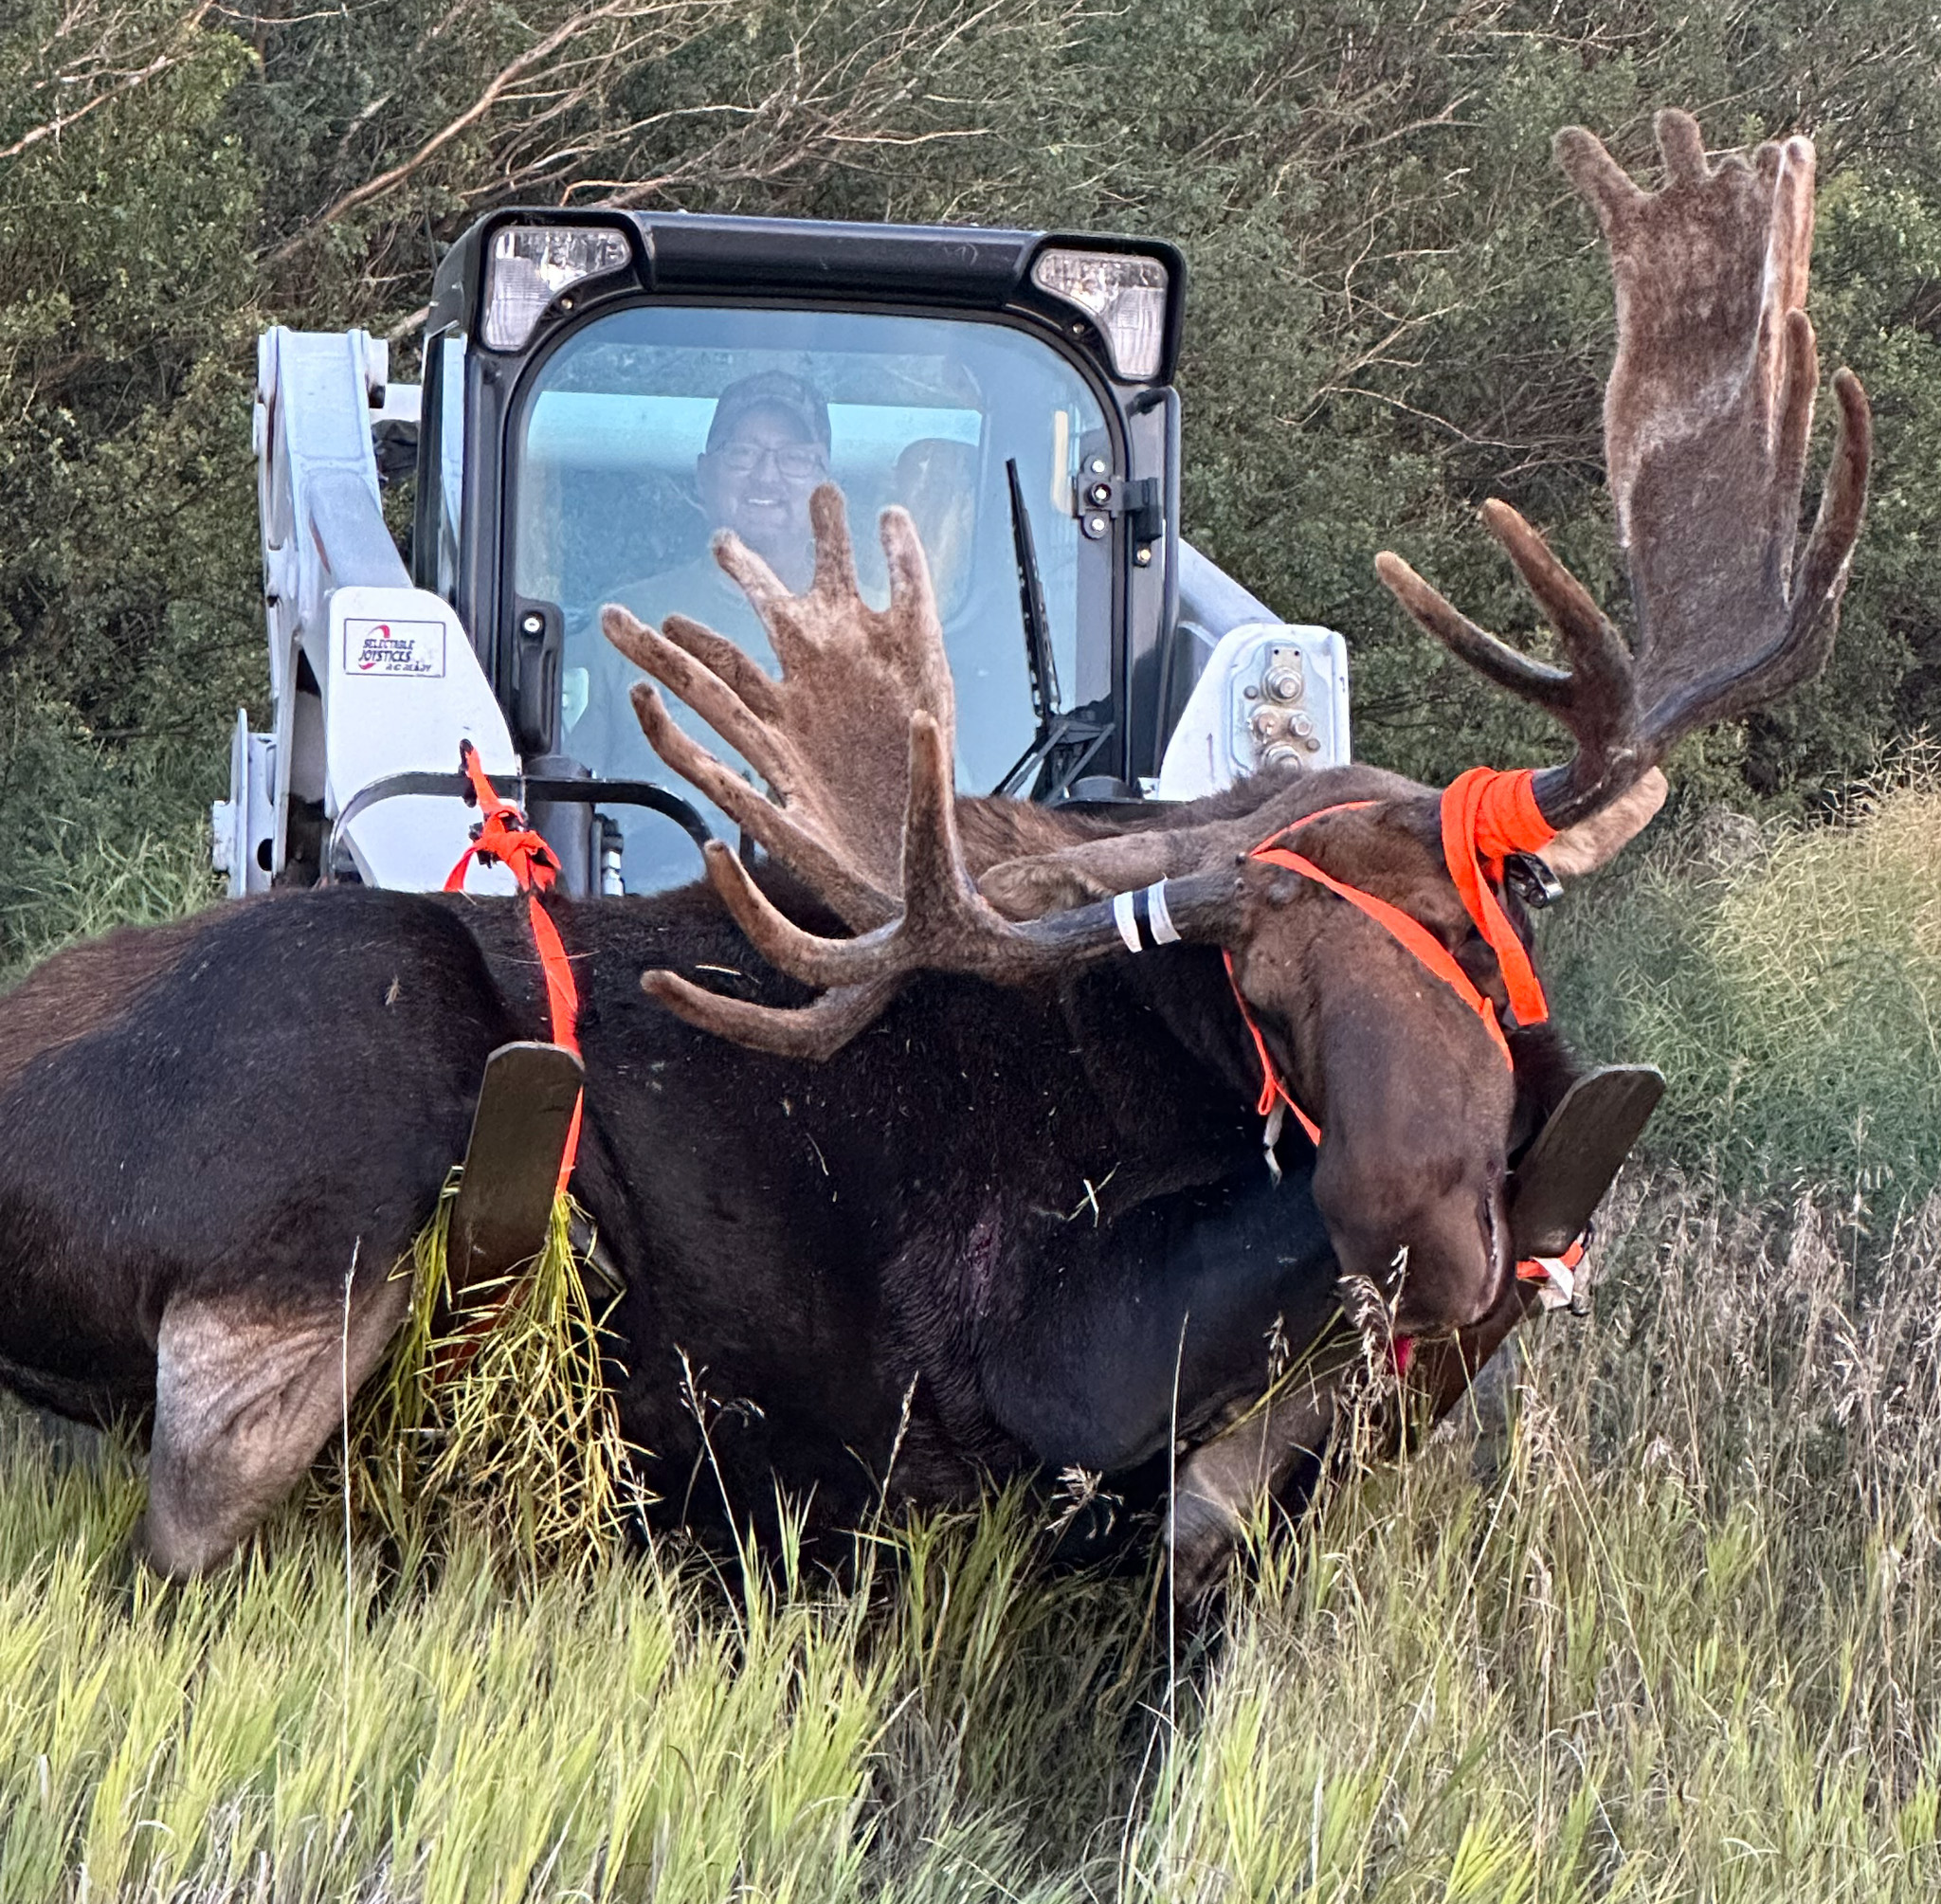 Lifting a moose out of the field with the aid of a Bobcat skid-steer.